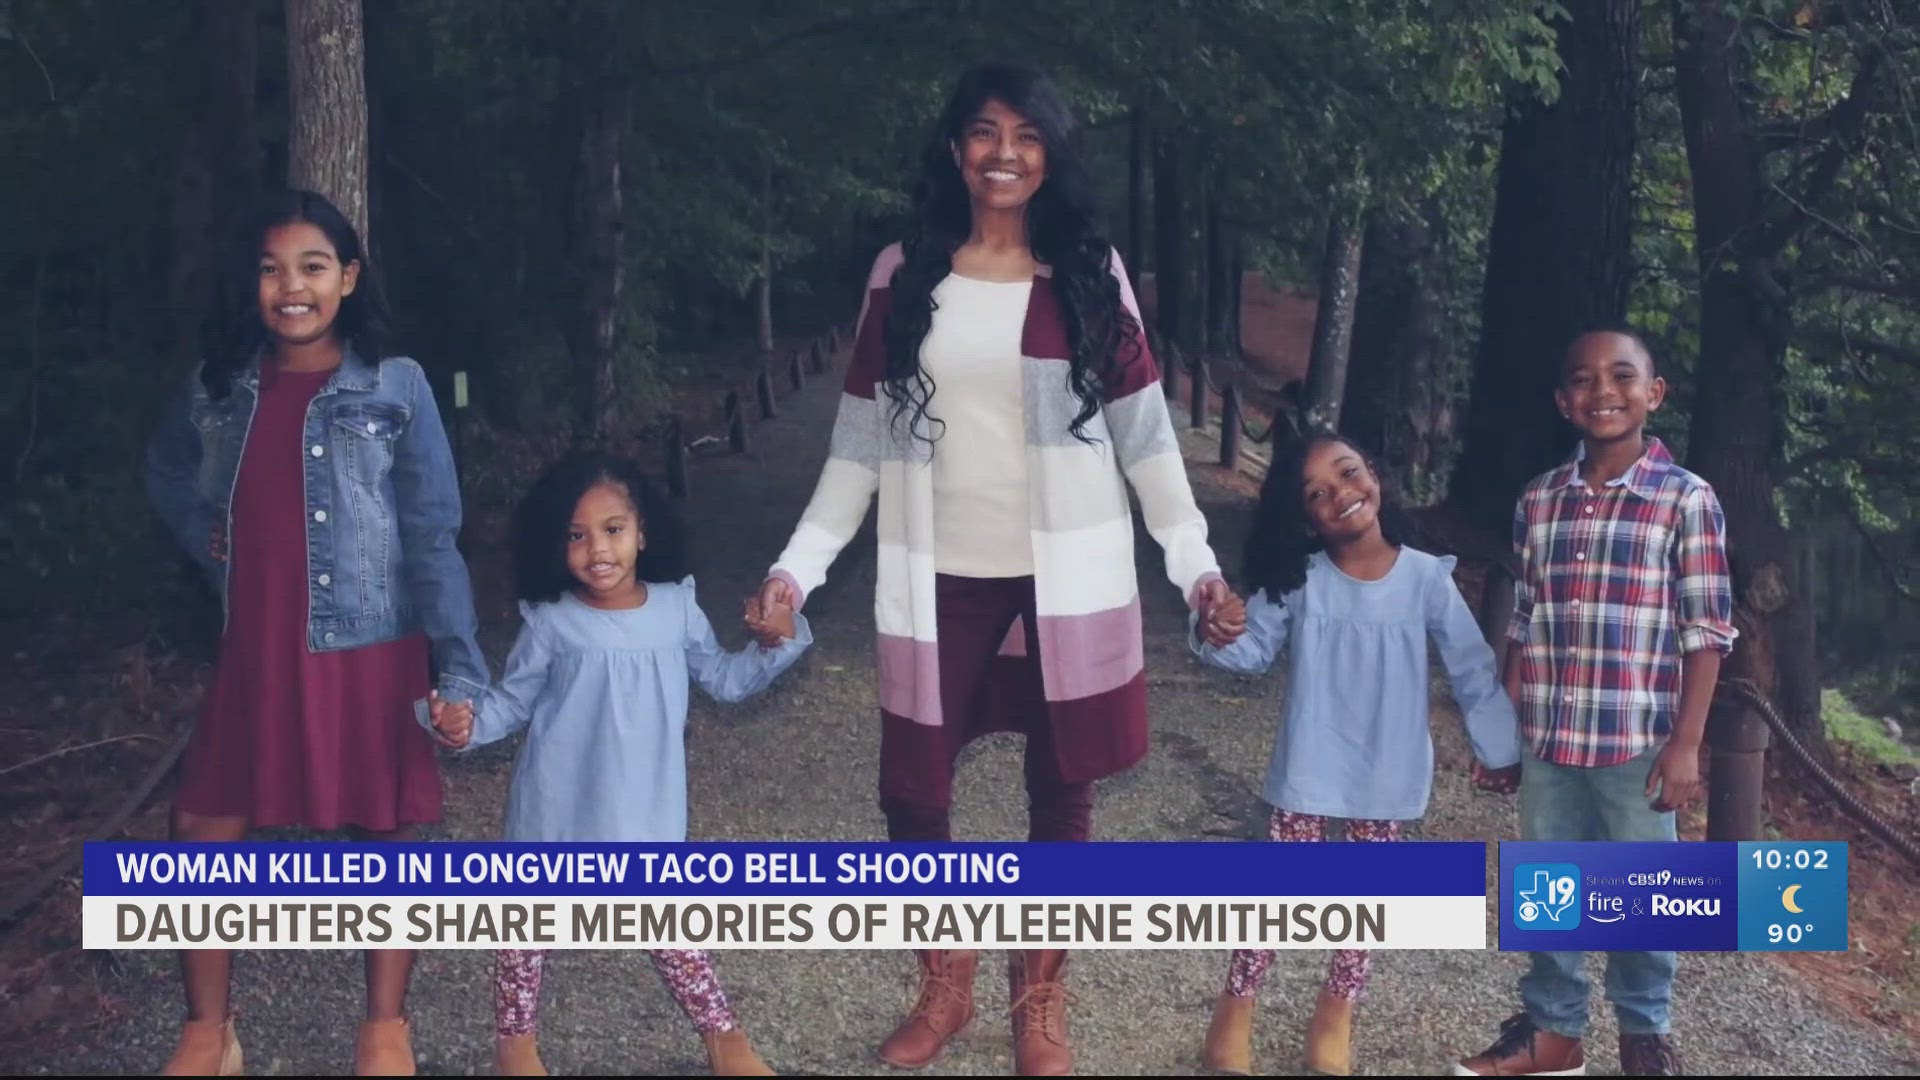 Daughters of woman killed in Longview Taco Bell shooting share memories of mother Rayleene Smithson